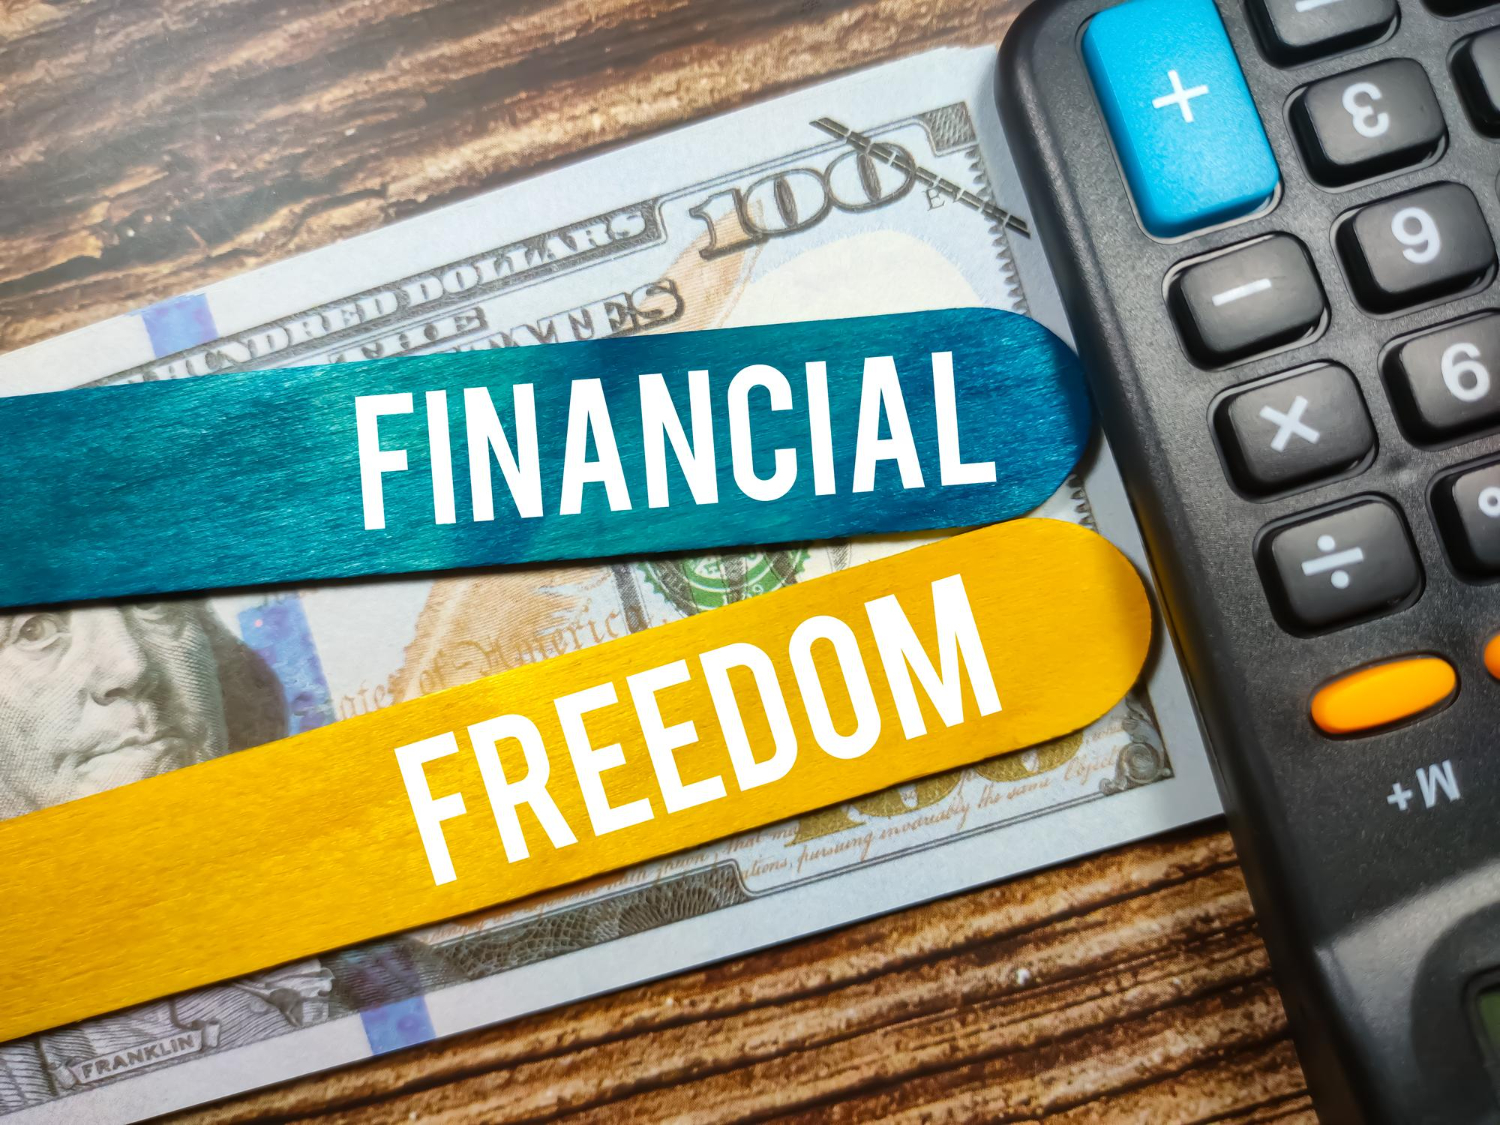 FreedomPlus Offers Customized Personal Loans for Consumers Looking to  Consolidate Debt or Make a Large Purchase